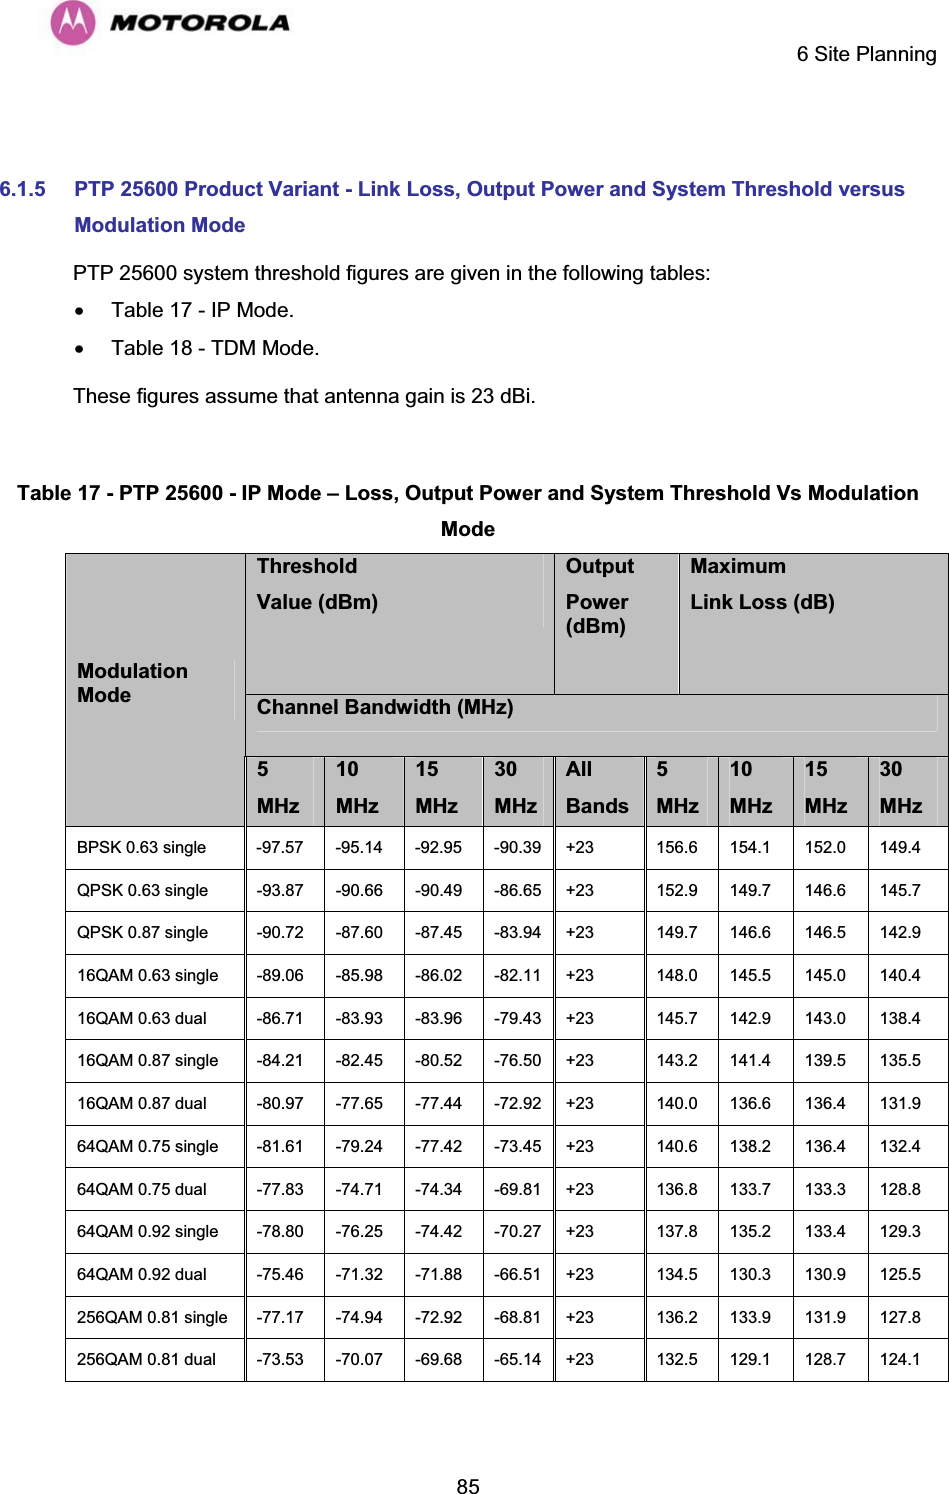     6 Site Planning  85 6.1.5 PTP 25600 Product Variant - Link Loss, Output Power and System Threshold versus Modulation Mode PTP 25600 system threshold figures are given in the following tables: x  Table 17 - IP Mode. x  Table 18 - TDM Mode. These figures assume that antenna gain is 23 dBi.  Table 17 - PTP 25600 - IP Mode – Loss, Output Power and System Threshold Vs Modulation ModeThreshold Value (dBm) Output Power (dBm) MaximumLink Loss (dB) Channel Bandwidth (MHz) ModulationMode5MHz10MHz15MHz30MHzAllBands 5MHz10MHz15MHz30MHzBPSK 0.63 single  -97.57   -95.14   -92.95   -90.39  +23  156.6   154.1   152.0   149.4  QPSK 0.63 single  -93.87   -90.66   -90.49   -86.65 +23  152.9   149.7   146.6   145.7  QPSK 0.87 single  -90.72   -87.60   -87.45   -83.94 +23  149.7   146.6   146.5   142.9  16QAM 0.63 single  -89.06   -85.98   -86.02   -82.11 +23  148.0   145.5   145.0   140.4  16QAM 0.63 dual  -86.71   -83.93   -83.96   -79.43 +23  145.7   142.9   143.0   138.4  16QAM 0.87 single  -84.21   -82.45   -80.52   -76.50 +23  143.2   141.4   139.5   135.5  16QAM 0.87 dual  -80.97   -77.65   -77.44   -72.92 +23  140.0   136.6   136.4   131.9  64QAM 0.75 single  -81.61   -79.24   -77.42   -73.45 +23  140.6   138.2   136.4   132.4  64QAM 0.75 dual  -77.83   -74.71   -74.34   -69.81 +23  136.8   133.7   133.3   128.8  64QAM 0.92 single  -78.80   -76.25   -74.42   -70.27 +23  137.8   135.2   133.4   129.3  64QAM 0.92 dual  -75.46   -71.32   -71.88   -66.51 +23  134.5   130.3   130.9   125.5  256QAM 0.81 single  -77.17   -74.94   -72.92   -68.81 +23  136.2   133.9   131.9   127.8  256QAM 0.81 dual  -73.53   -70.07   -69.68   -65.14 +23  132.5   129.1   128.7   124.1   